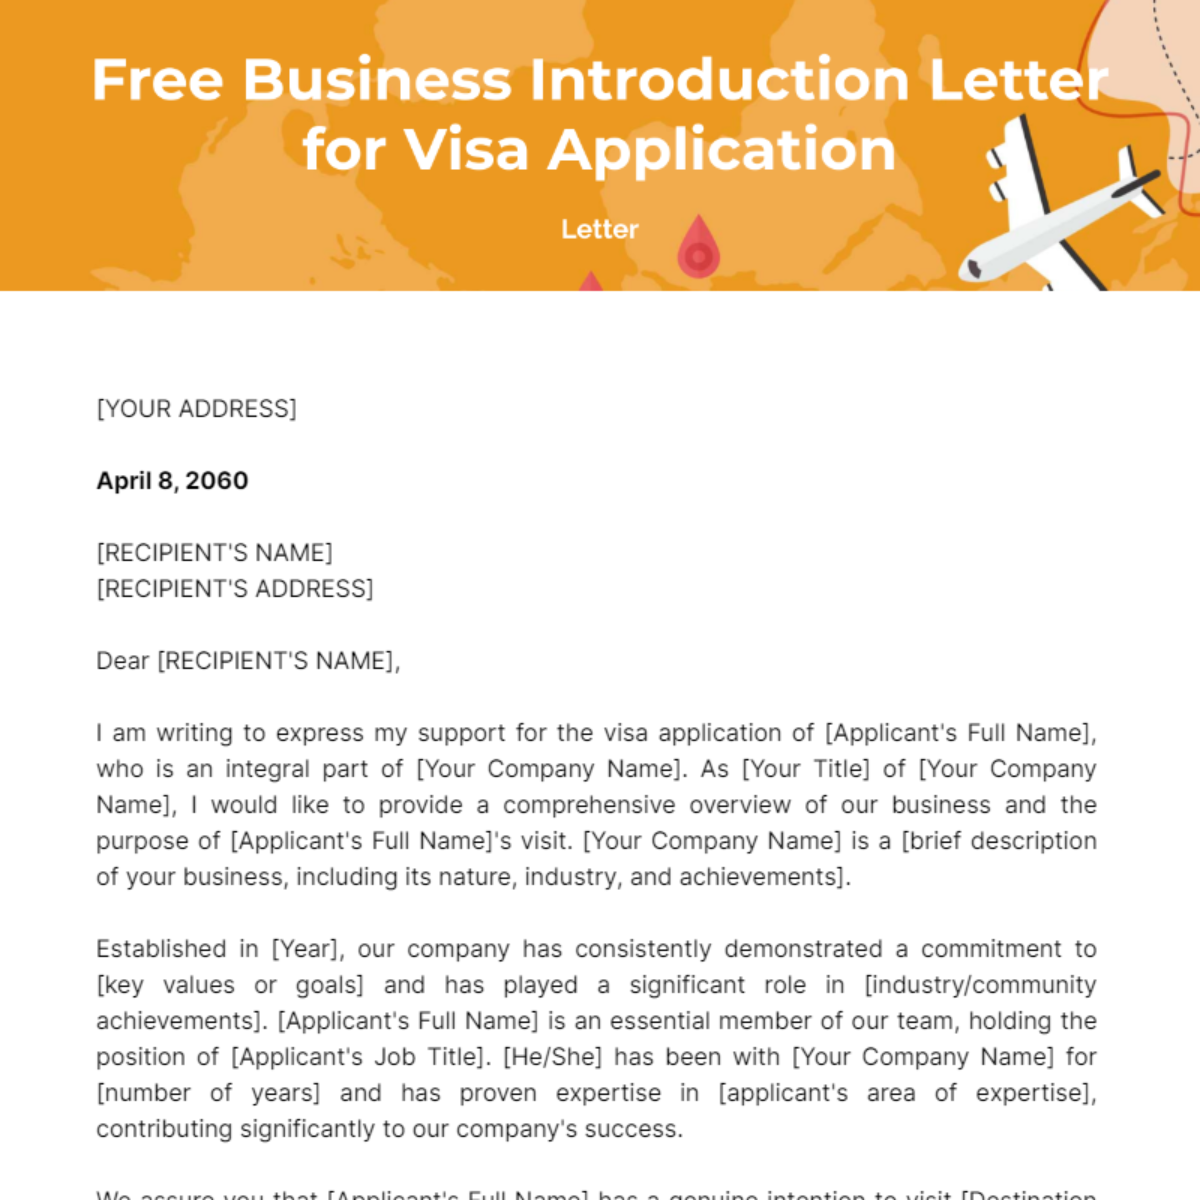 Business Introduction Letter for Visa Application Template